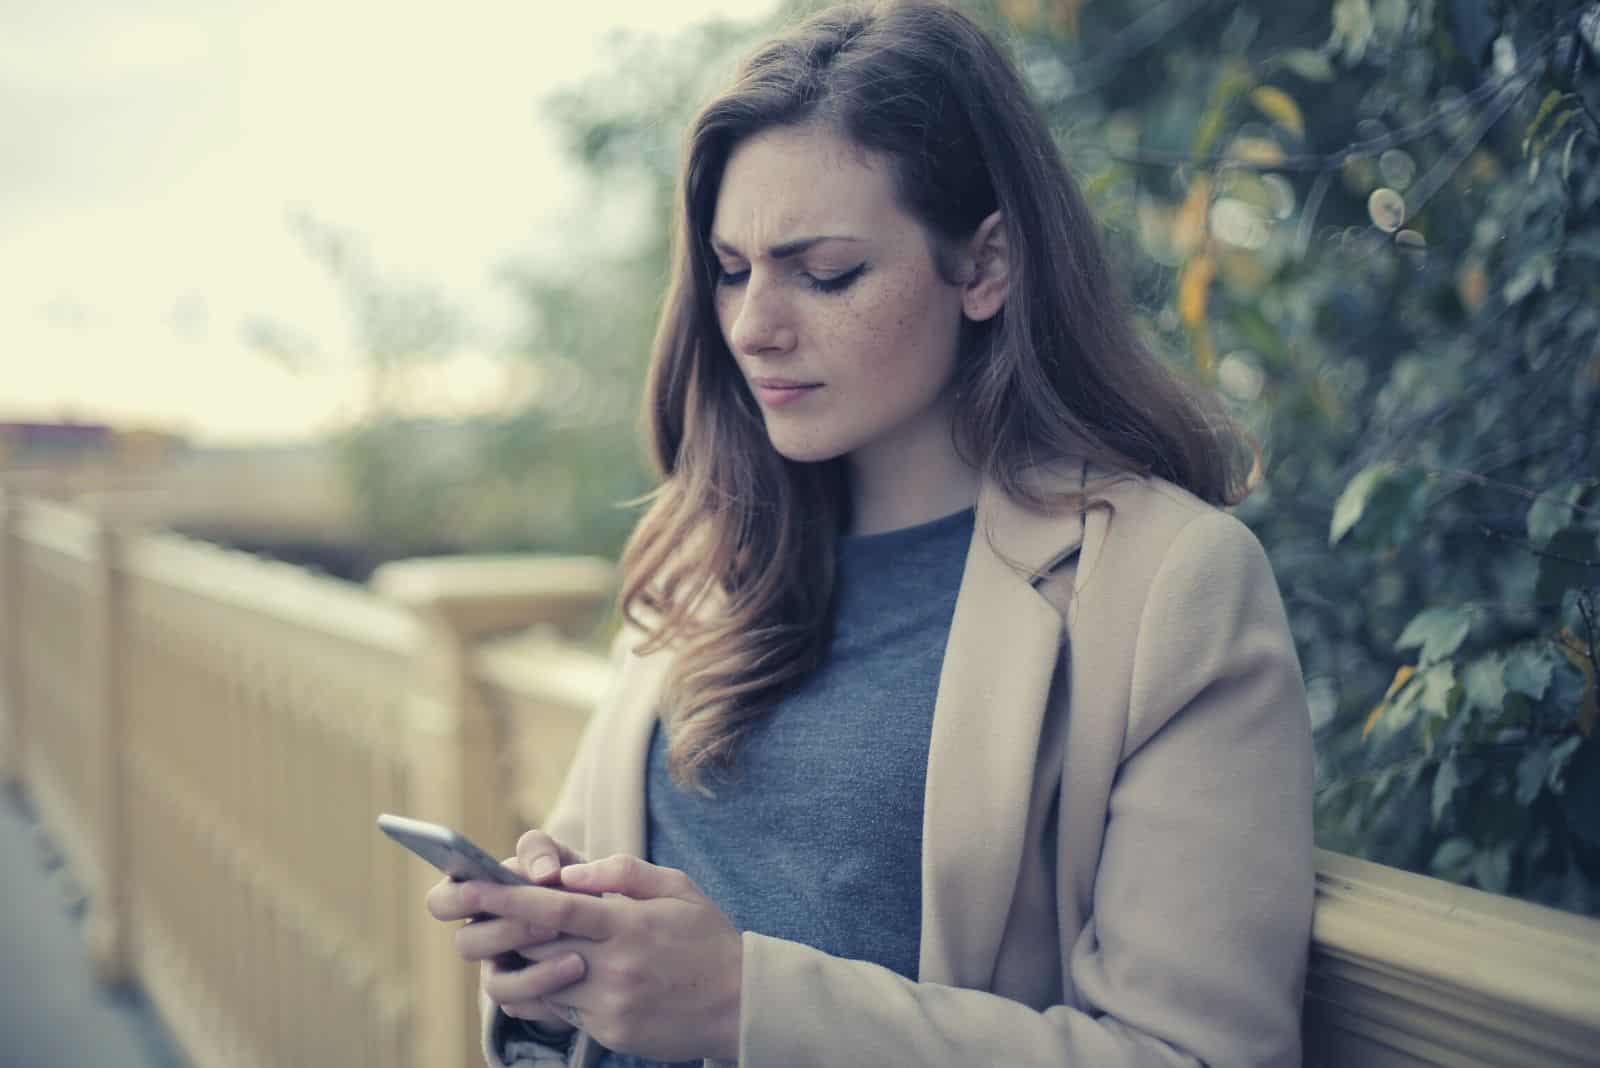 pensive woman typing message on her smartphone outdoors near a fence